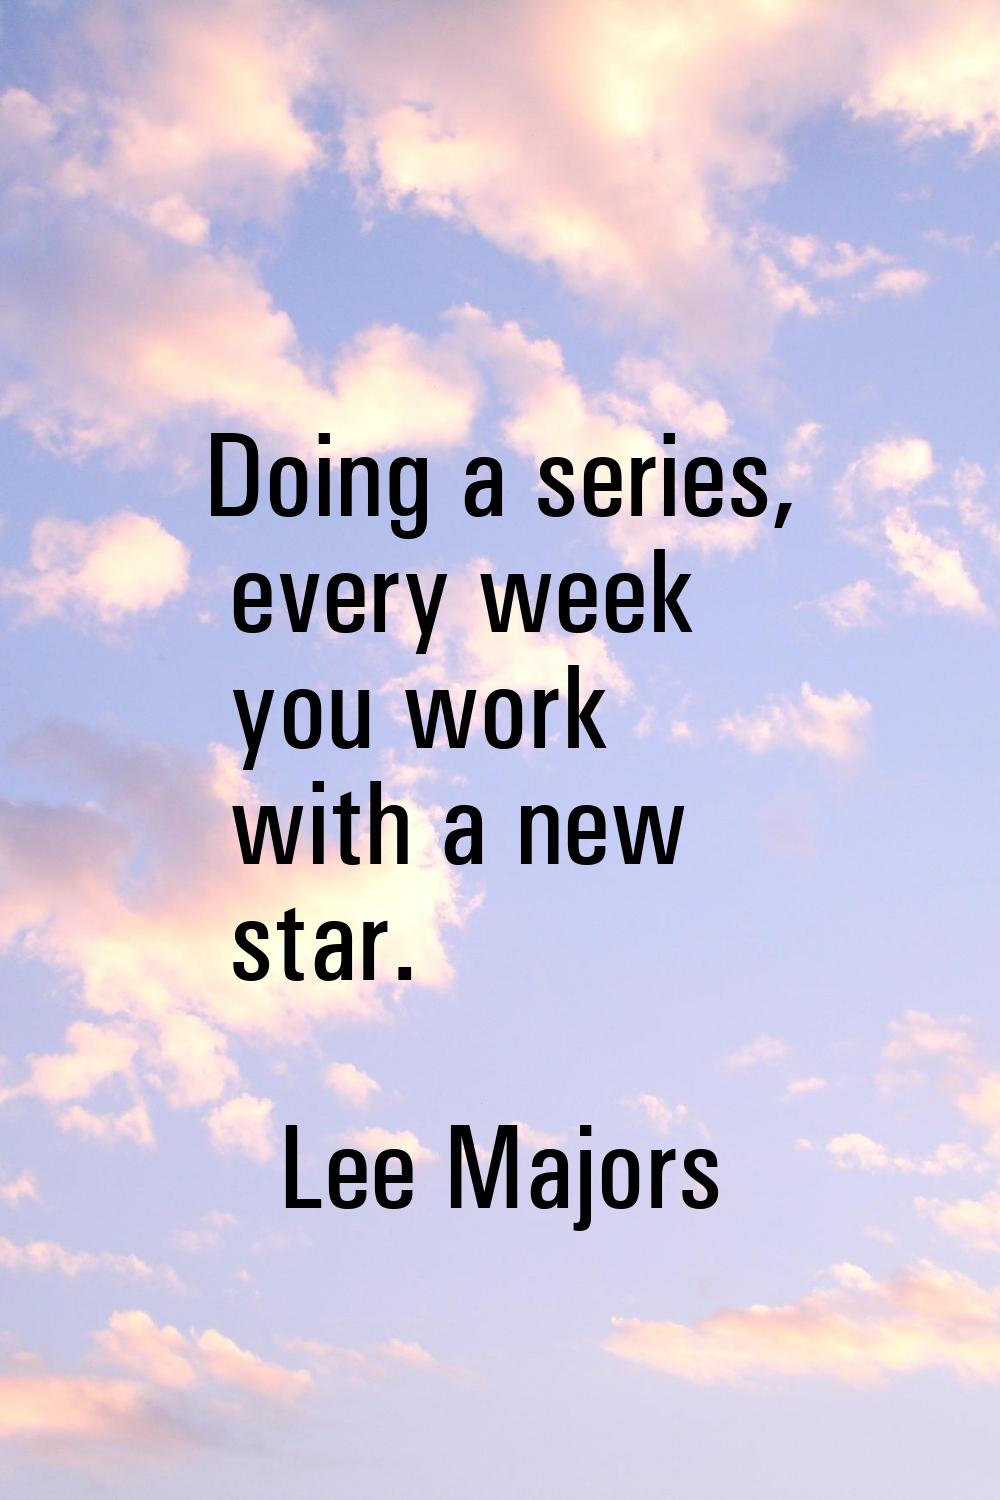 Doing a series, every week you work with a new star.